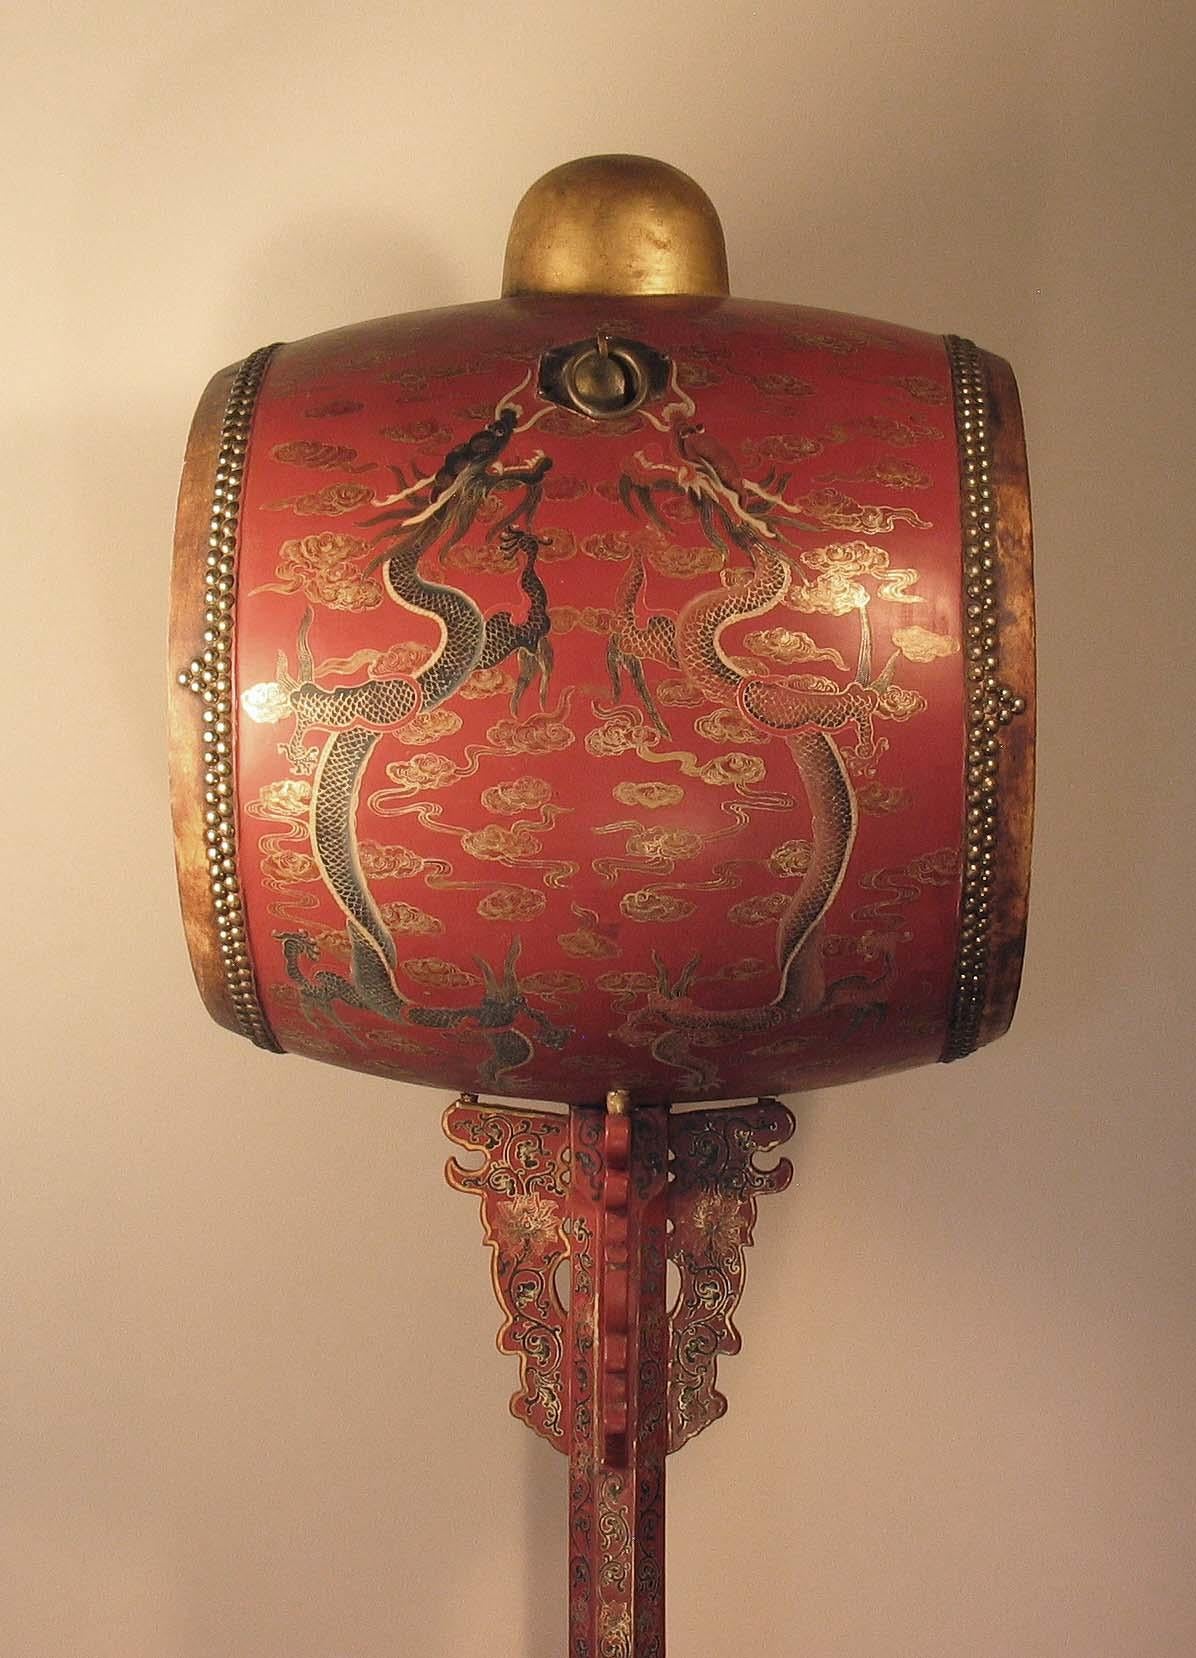 Animal Skin Rare 6 ft. Tall Chinese Ceremonial Lacquer Drum and Stand, 19th Century